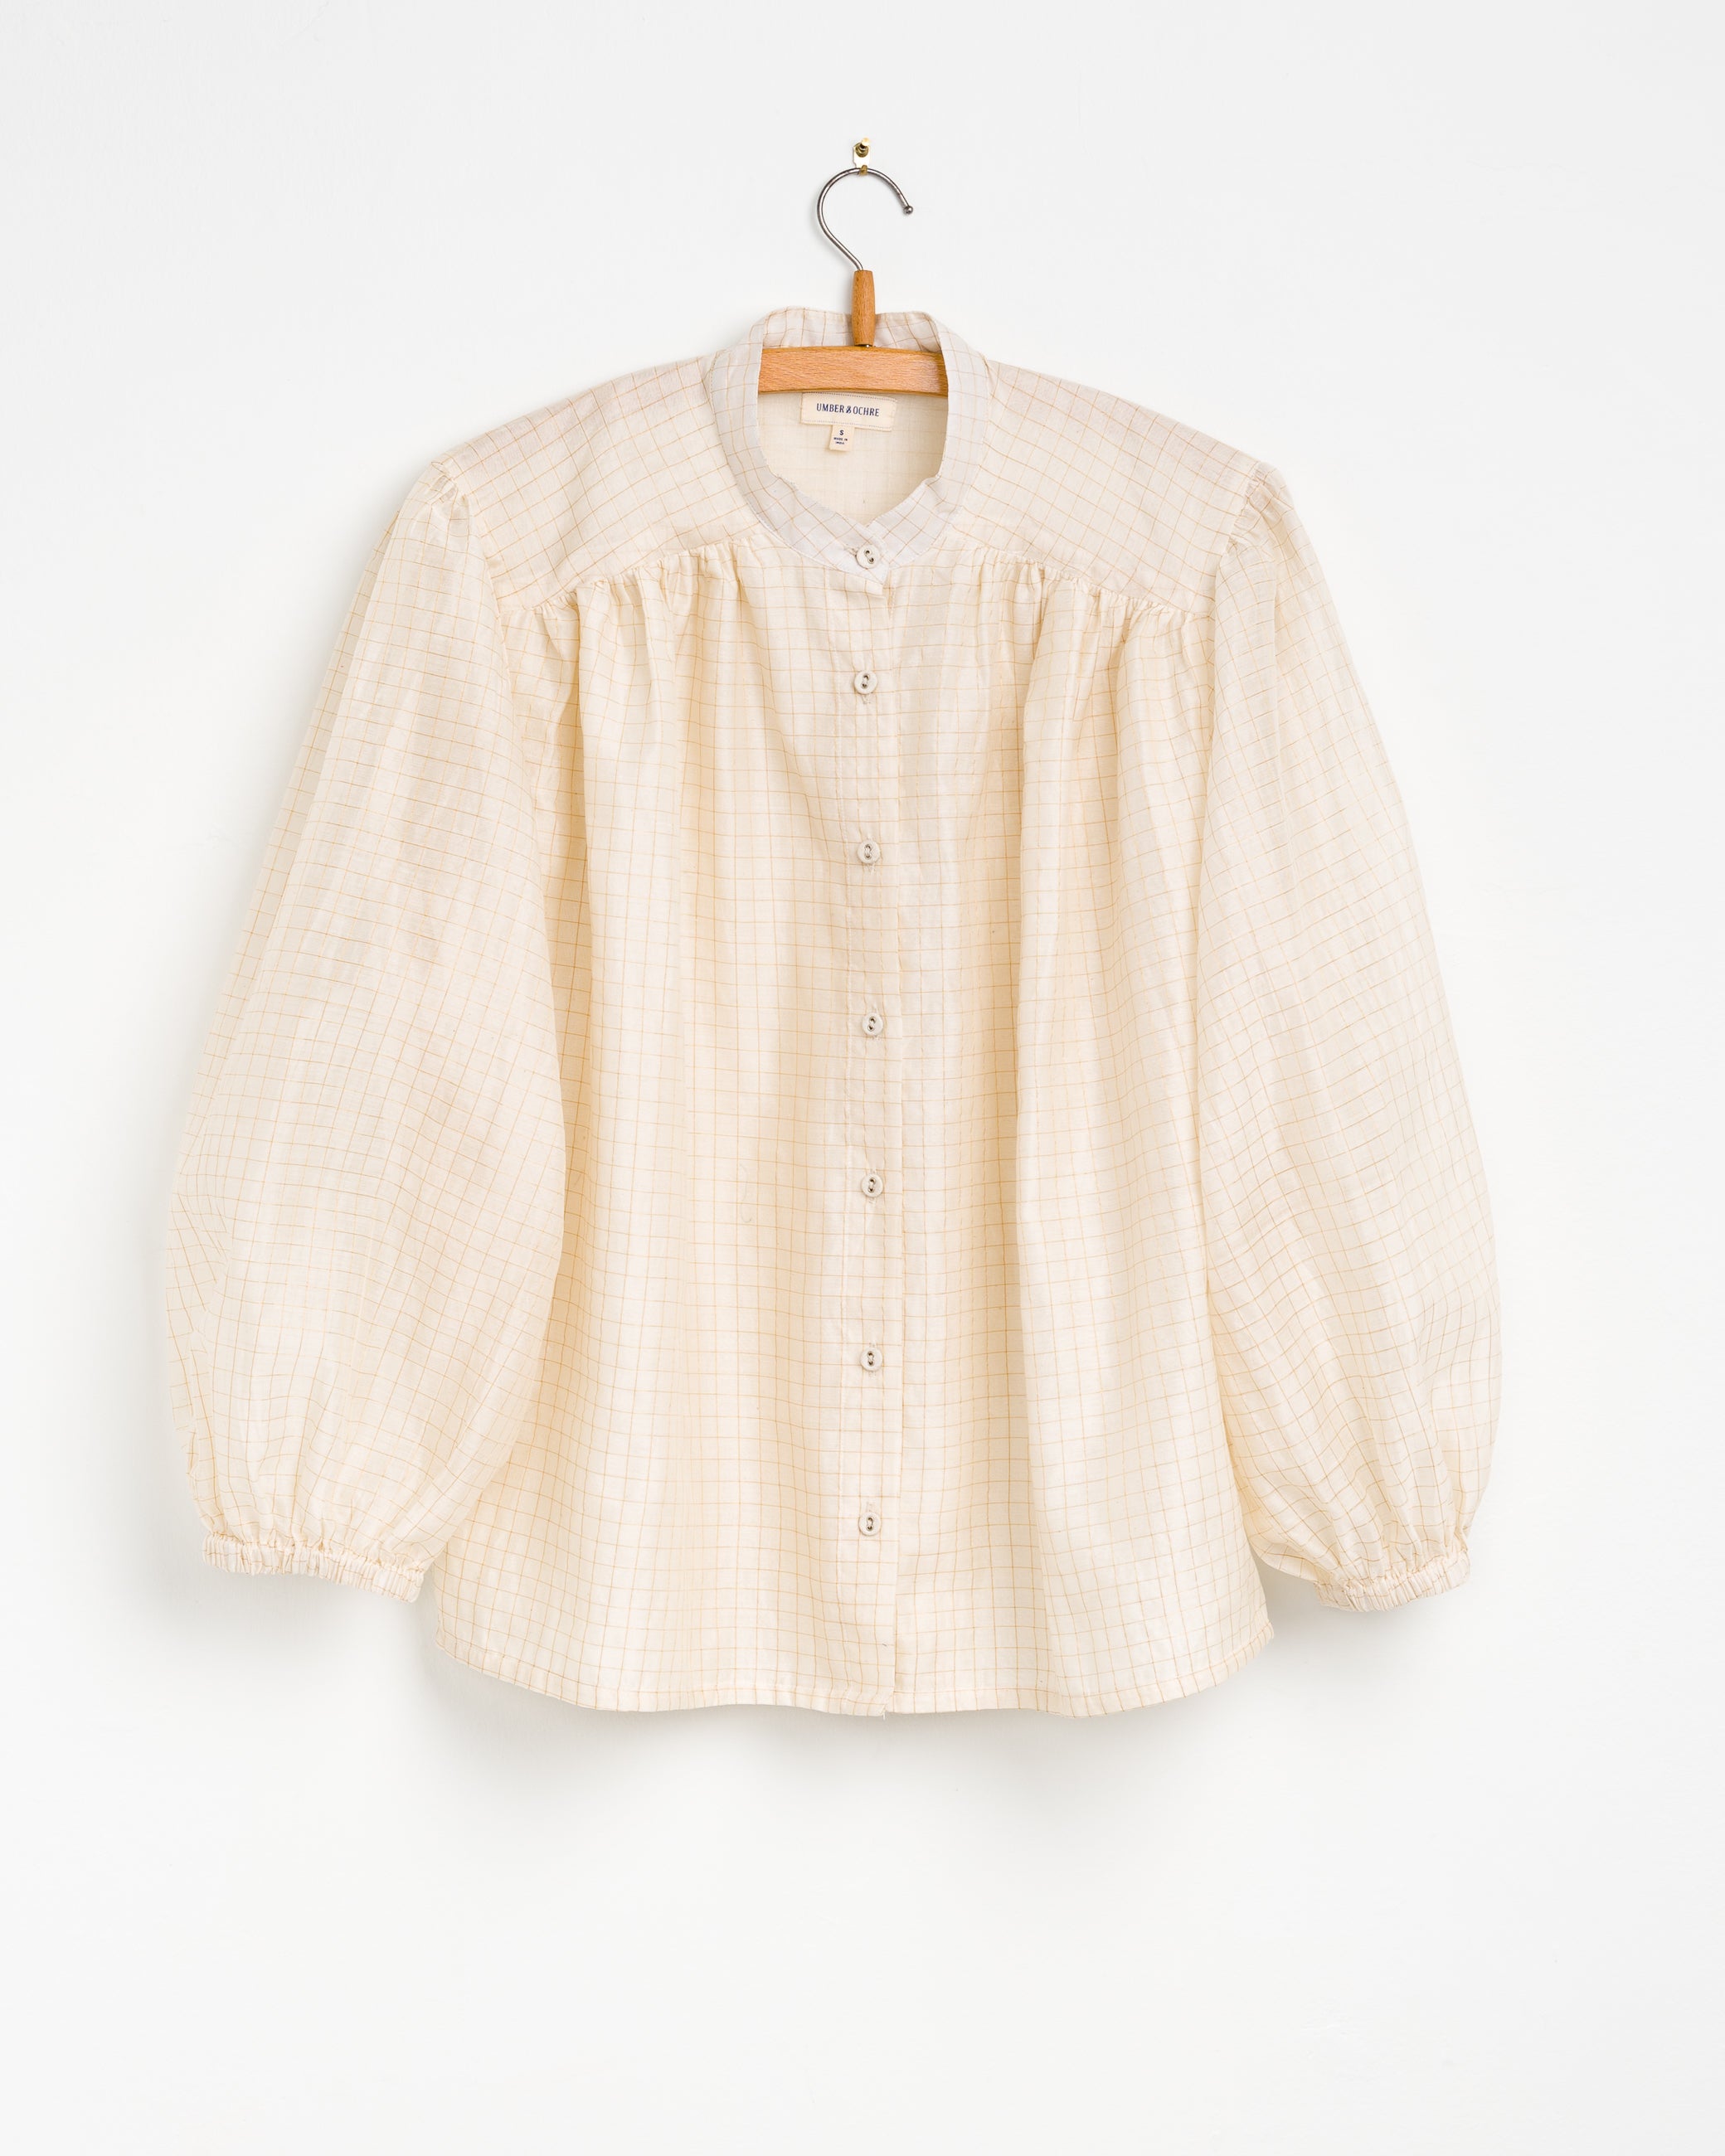 Sabrina Top in Ivory Gold Grid